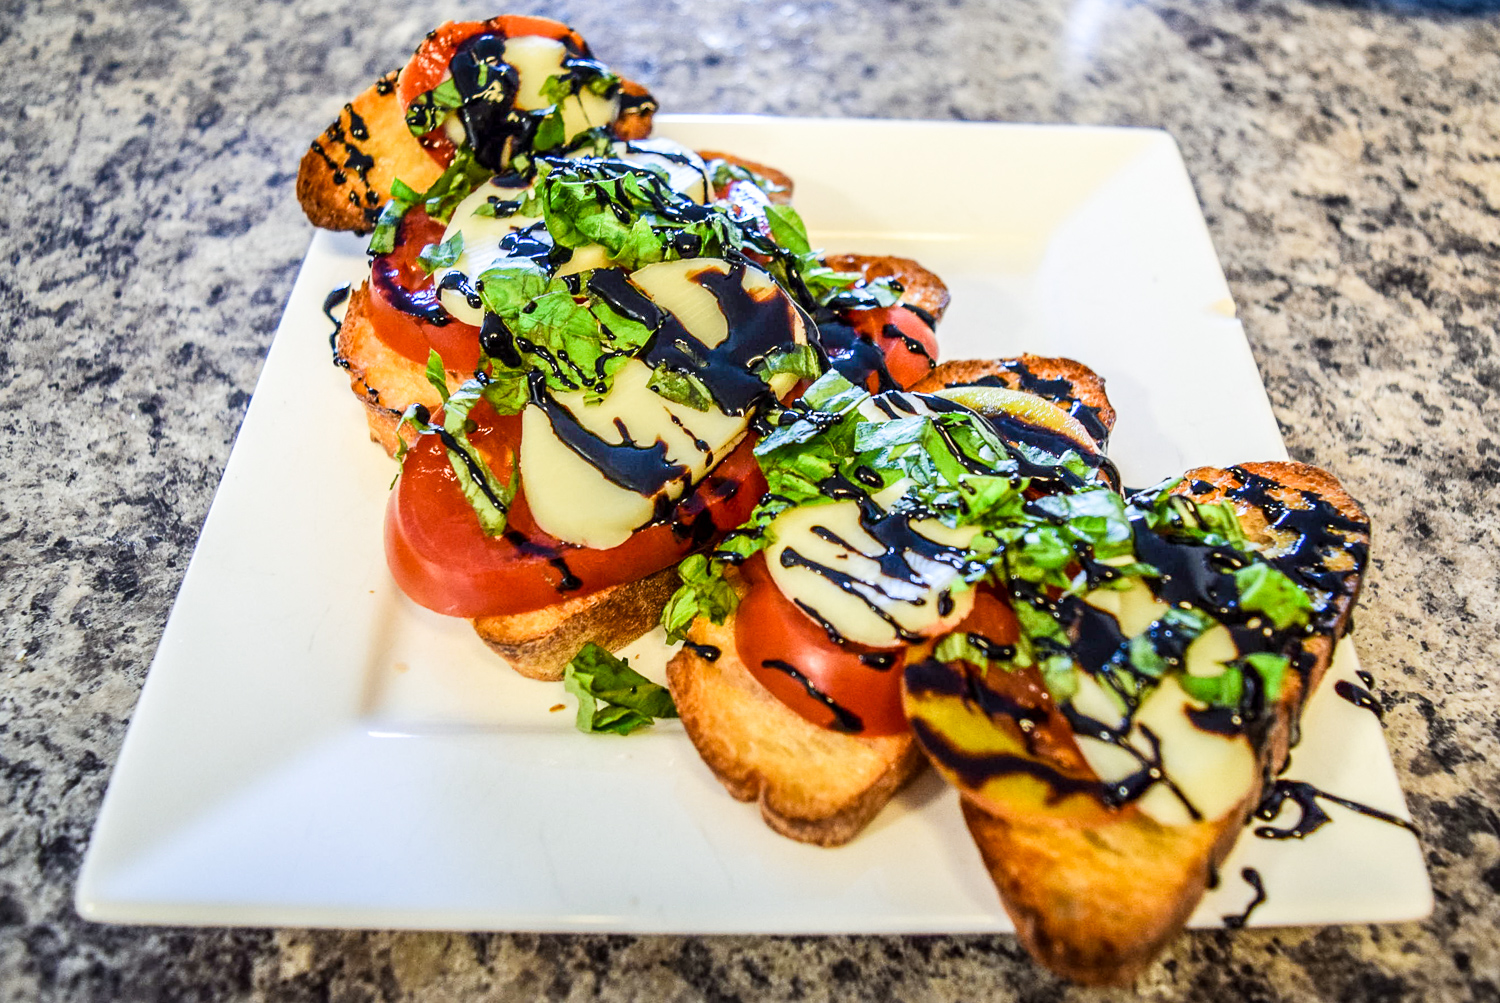 Finished caprese bruschetta with heirloom tomato, fresh basil, homemade mozzerella, and balsamic reduction from front